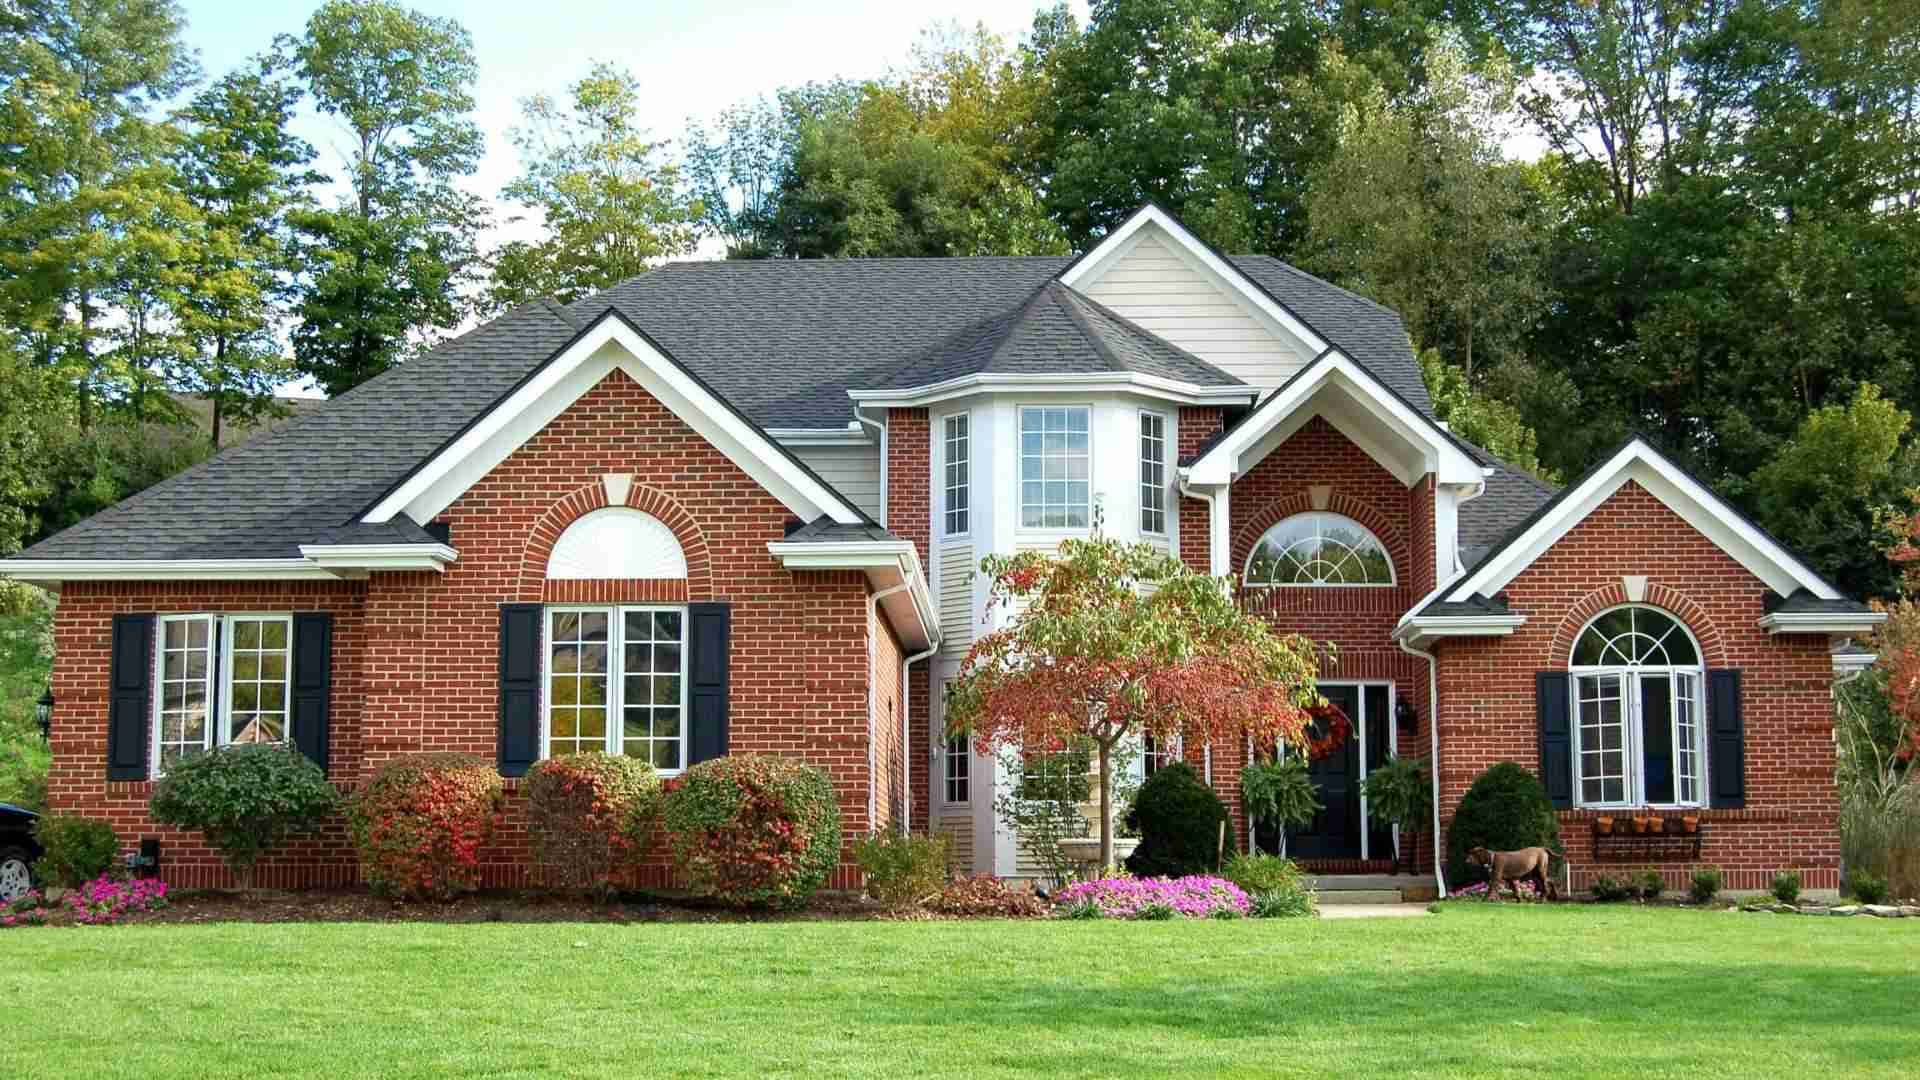 Brick home with new roof in nj by American Home Contractors, roofing company new jersey